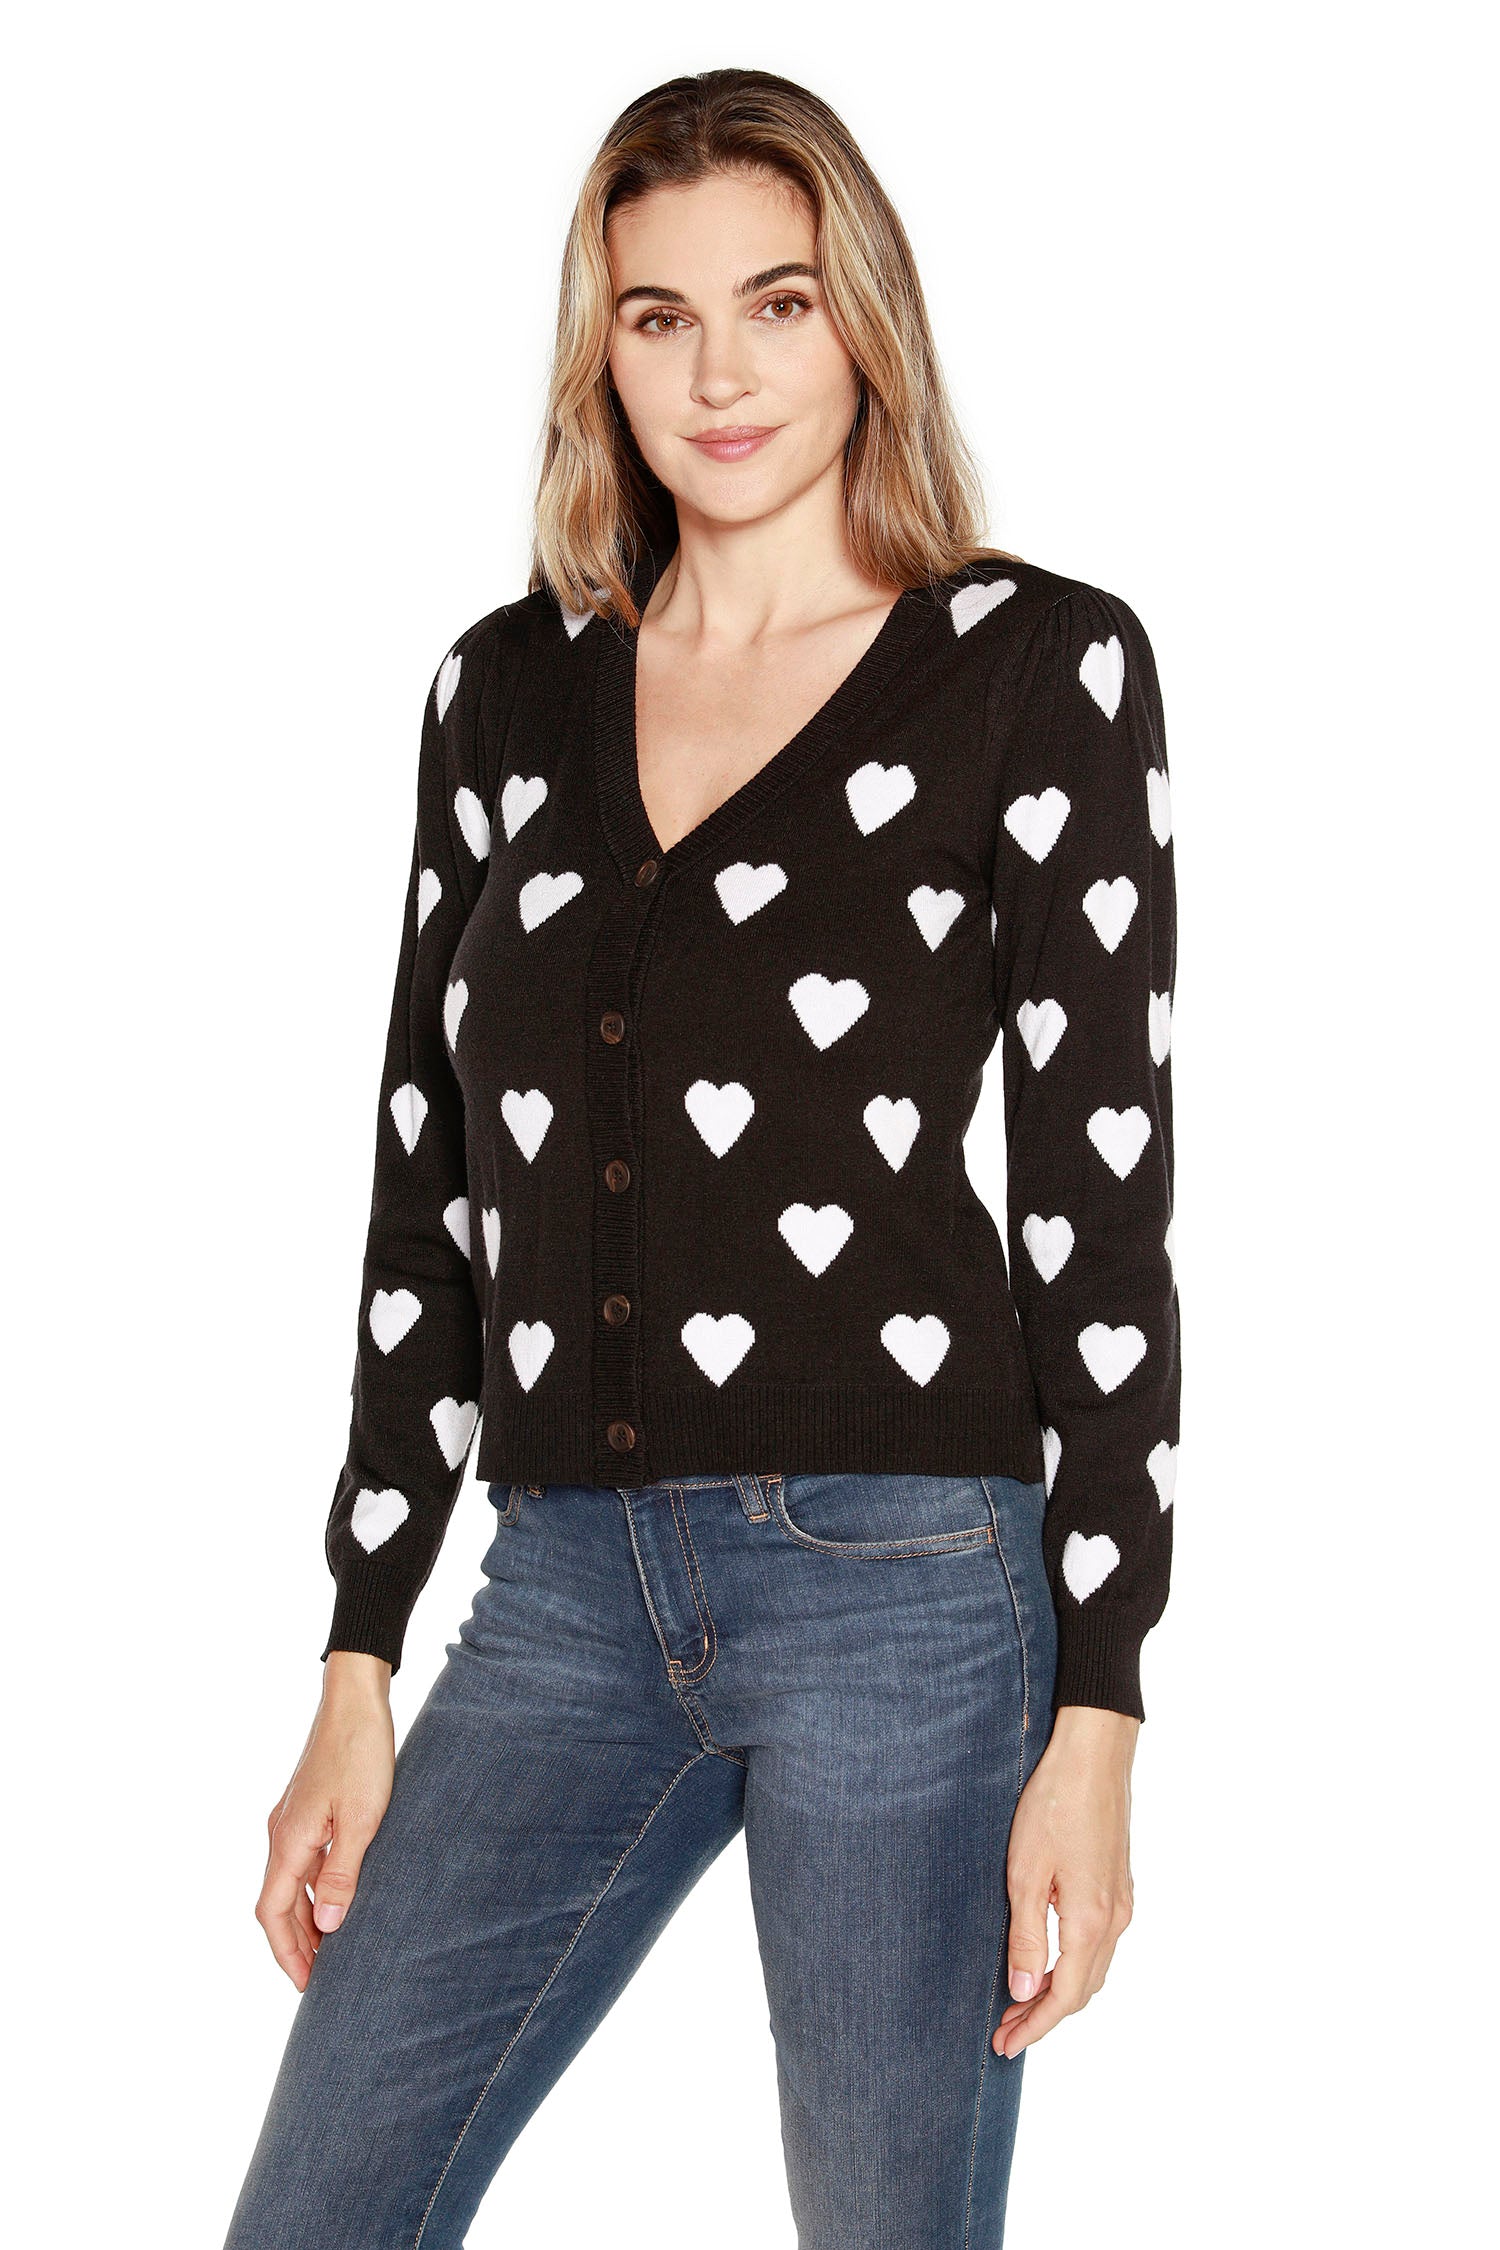 Women's Jacquard Button Up Sweater Cardigan with Heart Design